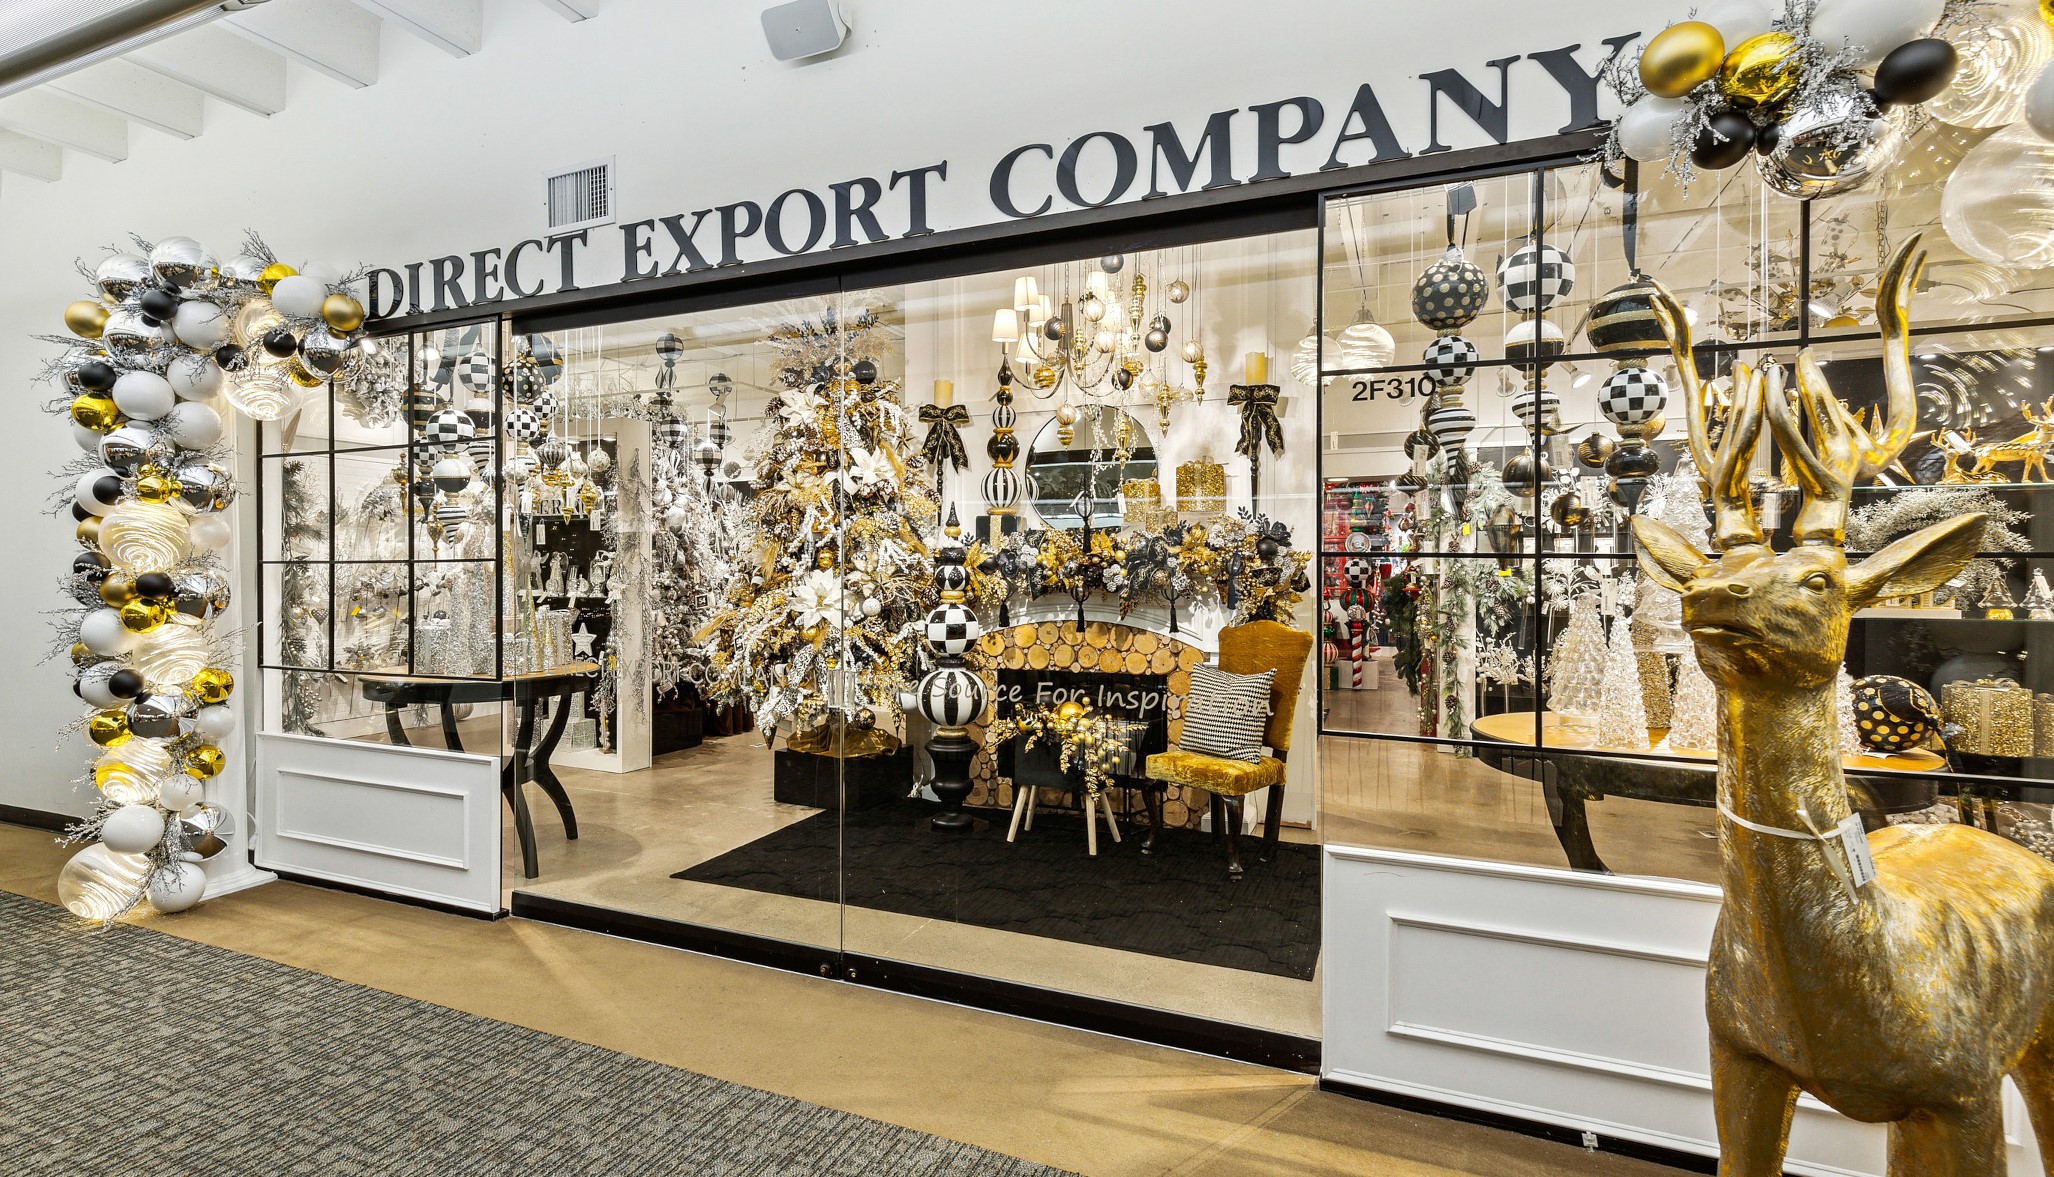 Dallas Total Home & Gift Market Direct Export Company